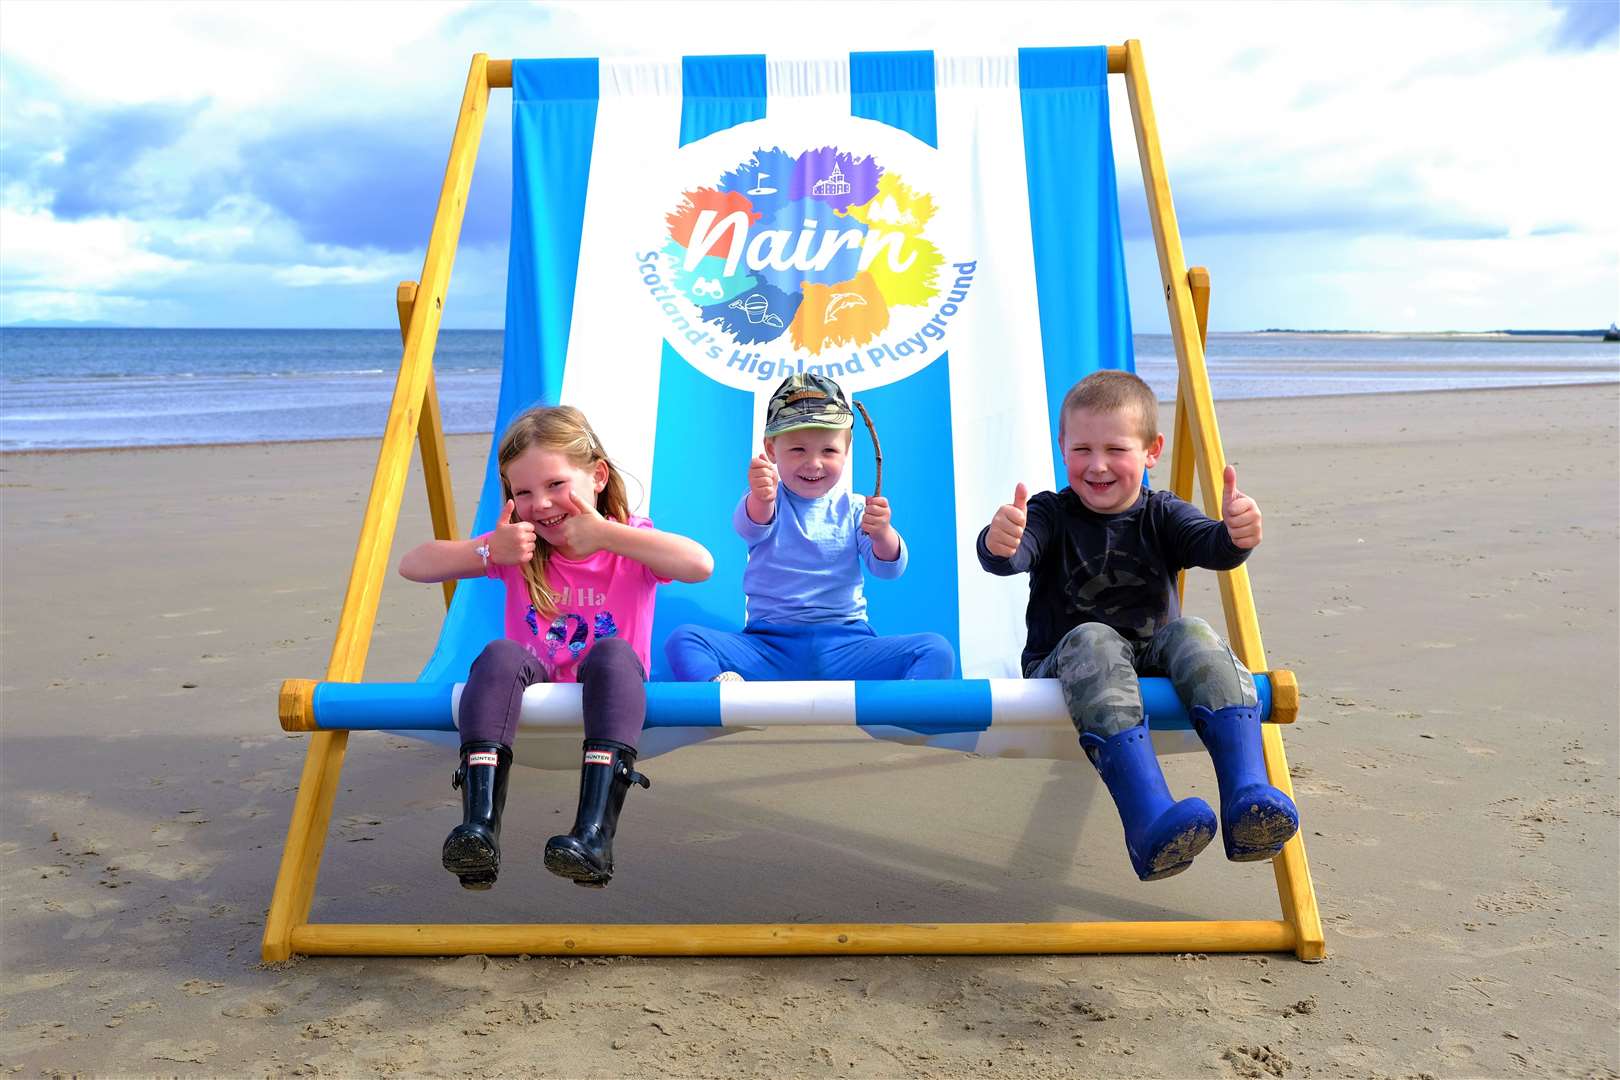 Youngsters on the beach give the thumbs up to Nairn's new moniker.